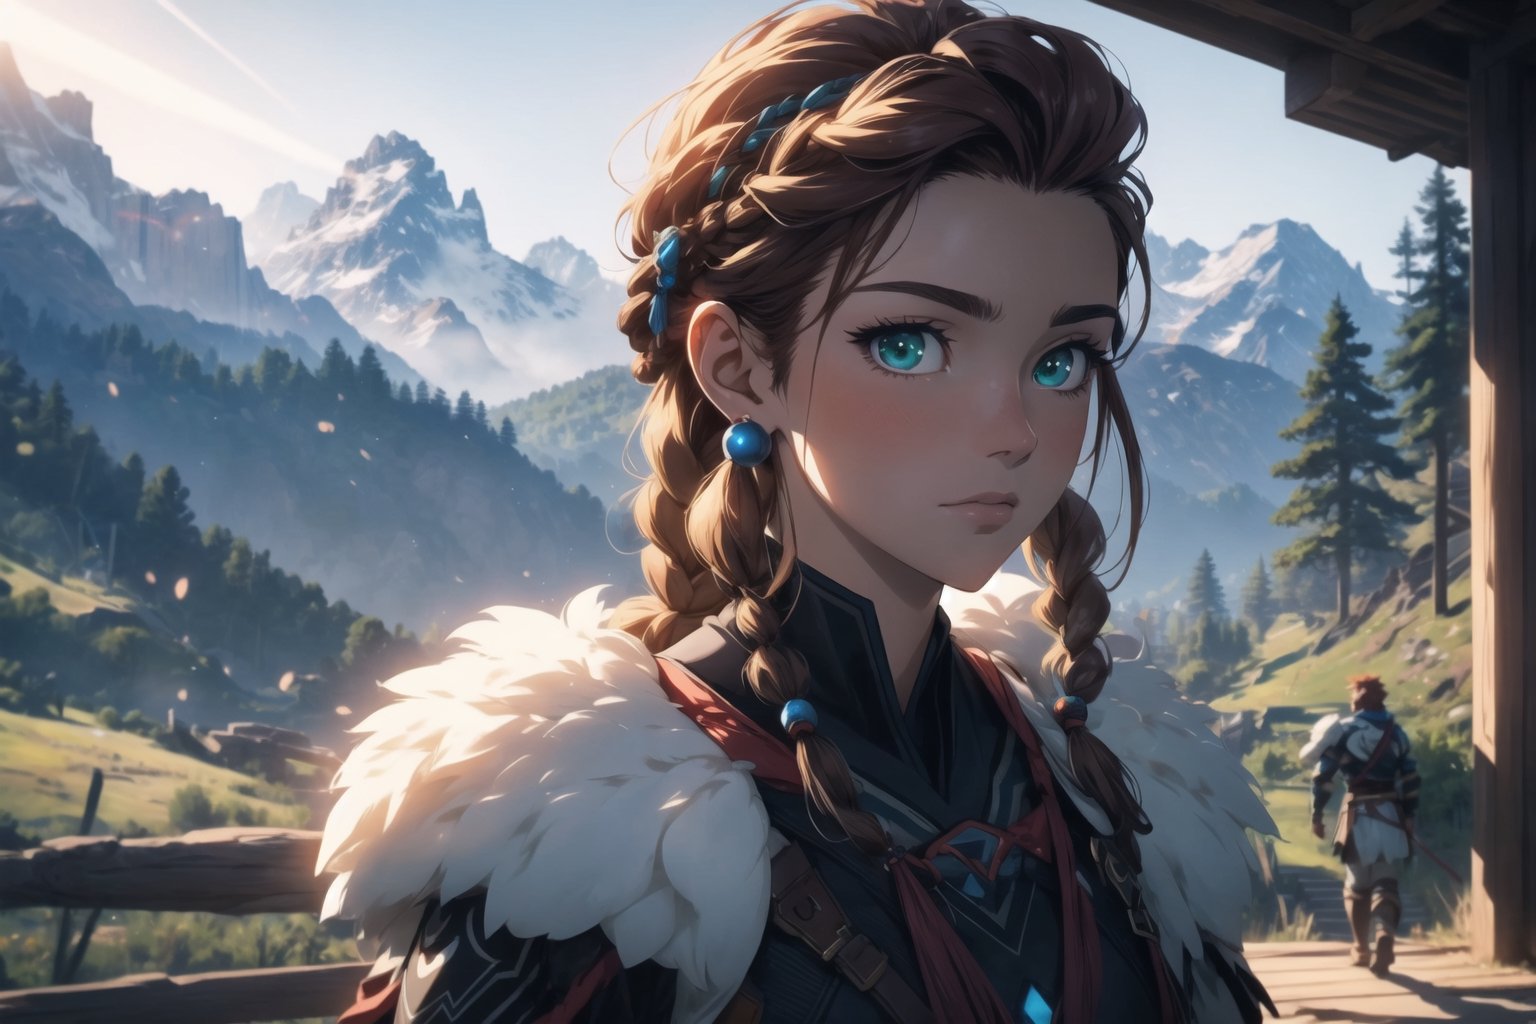 (masterpiece, best quality), (8K, UHD), ((90s anime style)), Aloy from Horizon Zero Dawn, fit and sexy body, nice chest, beautiful long red hair, well shaped green eyes, wearing a fur hunter like outfit, beads and braids, mountain tops, sunny, rays of sun light, not looking at camera, multiple poses, (alluring shots), illustration,portrait,rgbcolor,emotion